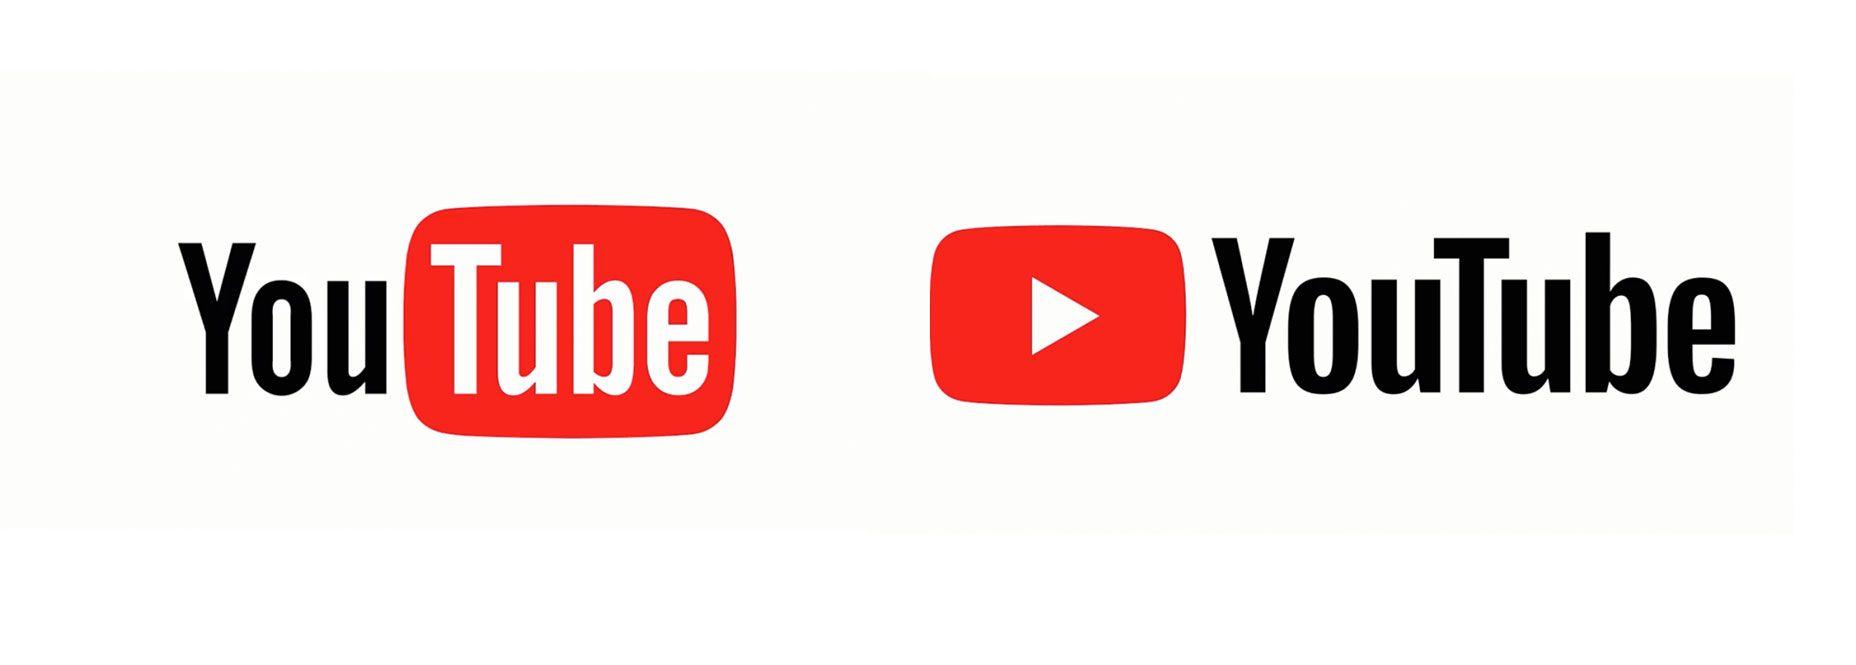 YouTube Old Logo - YouTube Unveils 1st New Logo Since Launch | Smart Hatch